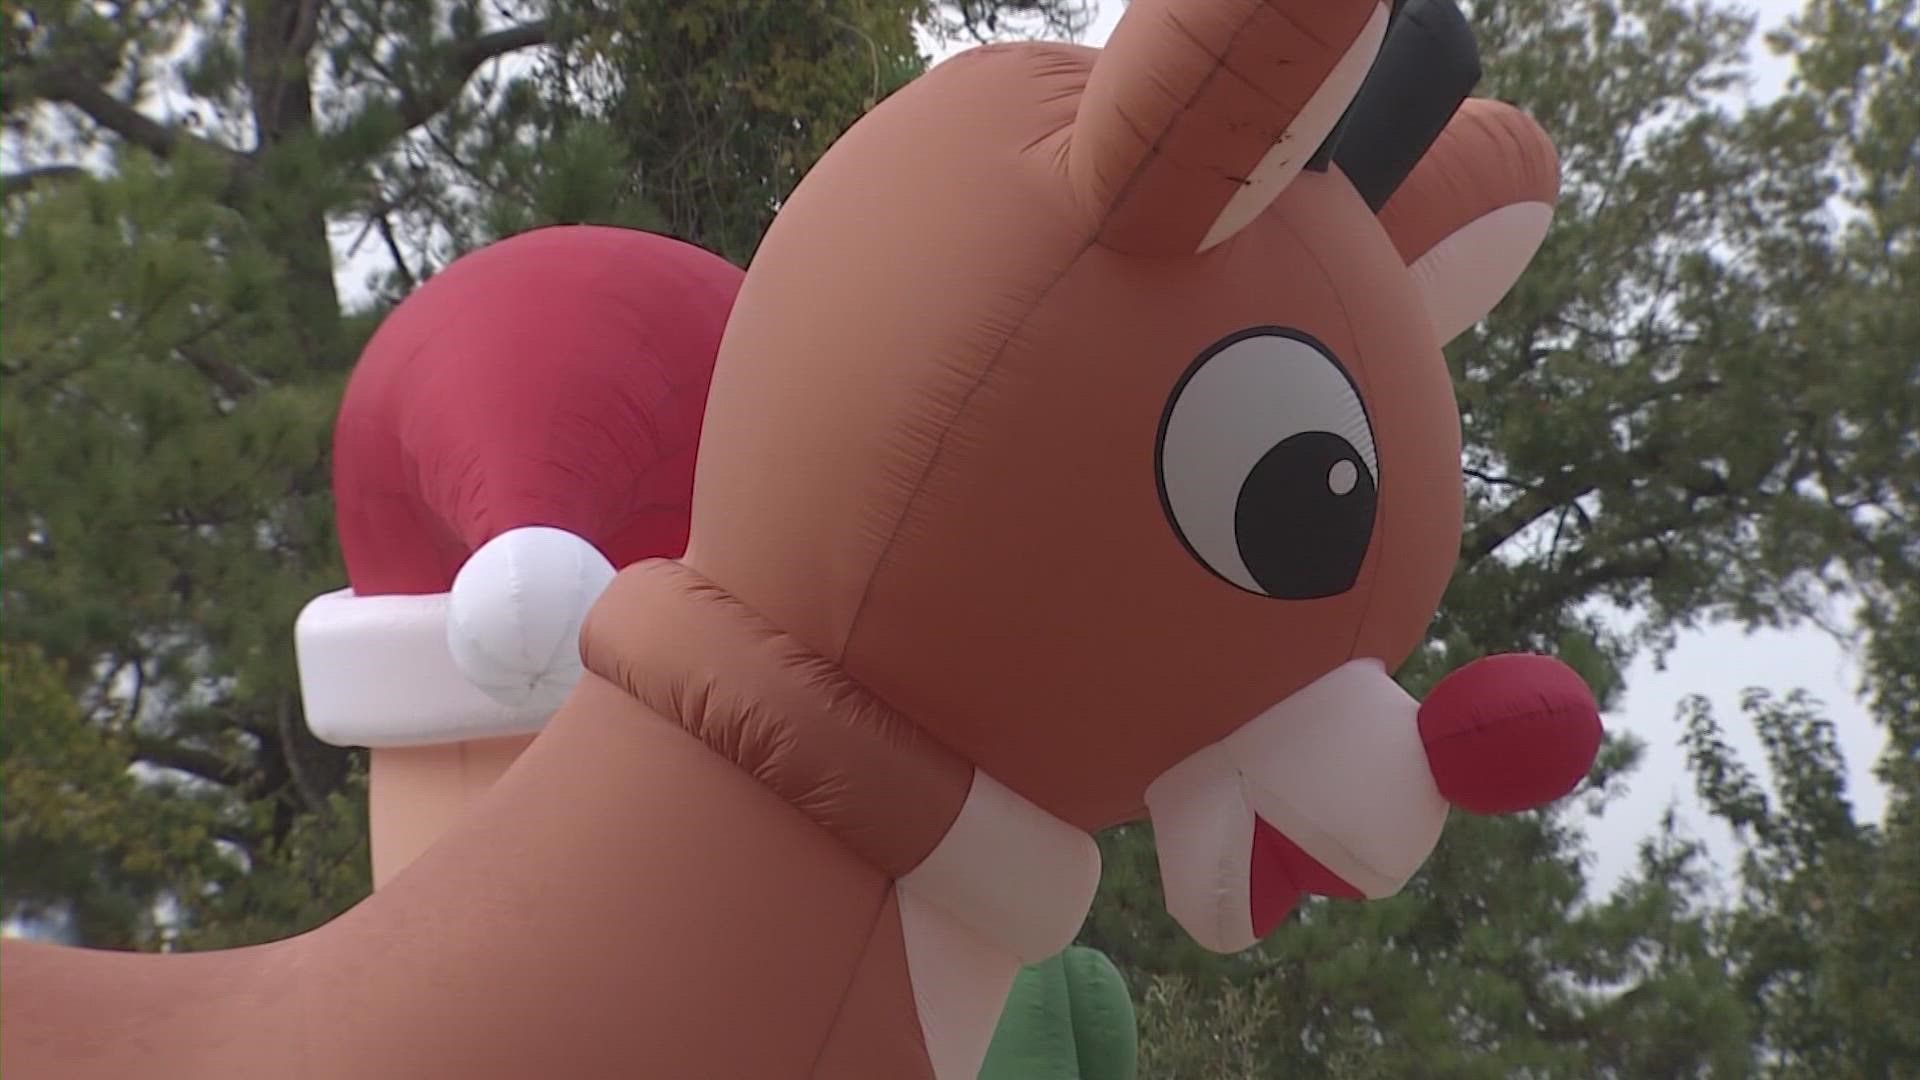 A giant inflatable Rudolph has been returned after thieves were caught on camera stealing it from a northwest Houston yard in the middle of the night.